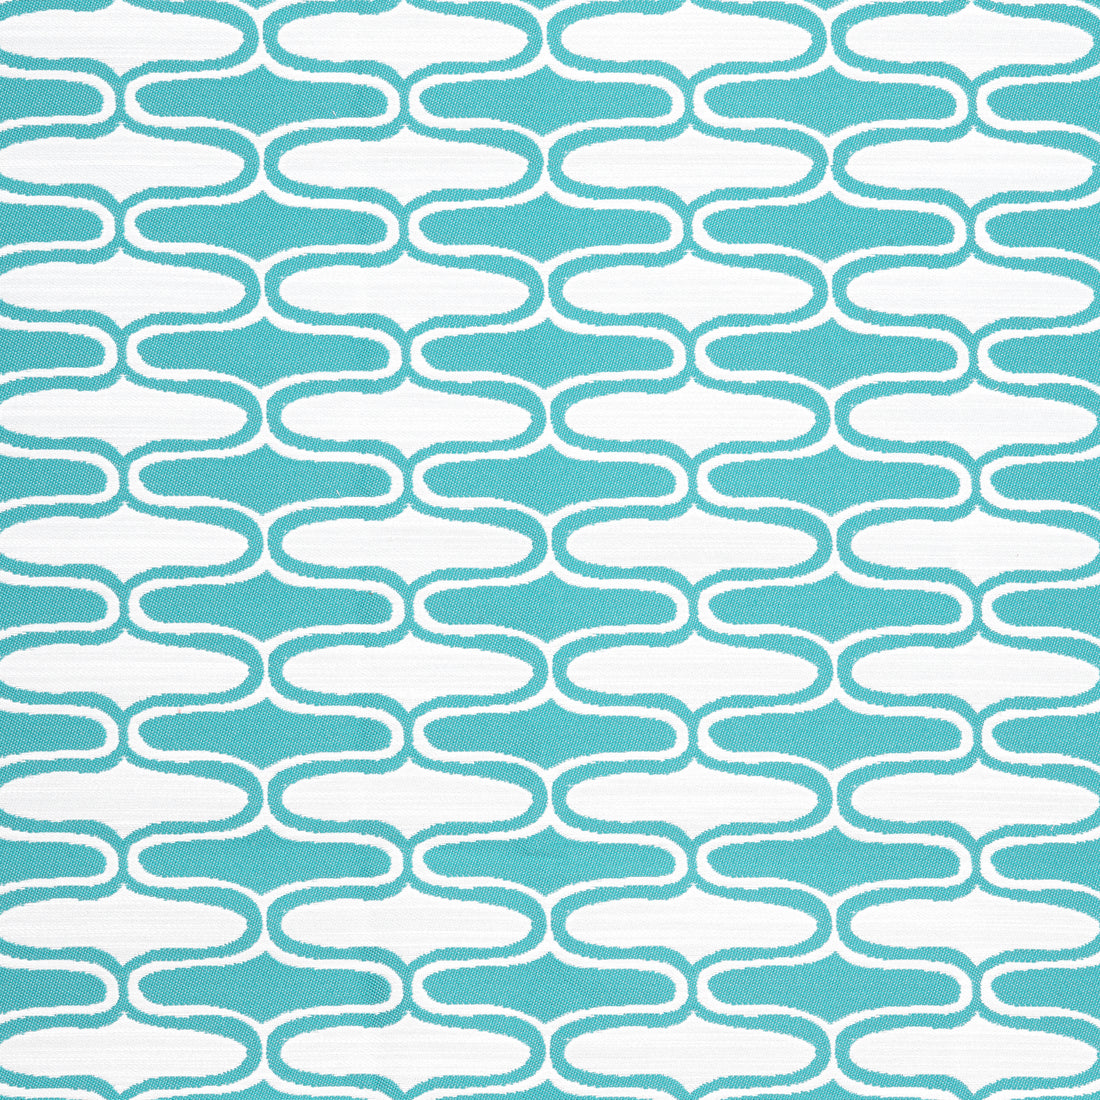 Saraband fabric in capri color - pattern number W8533 - by Thibaut in the Villa collection